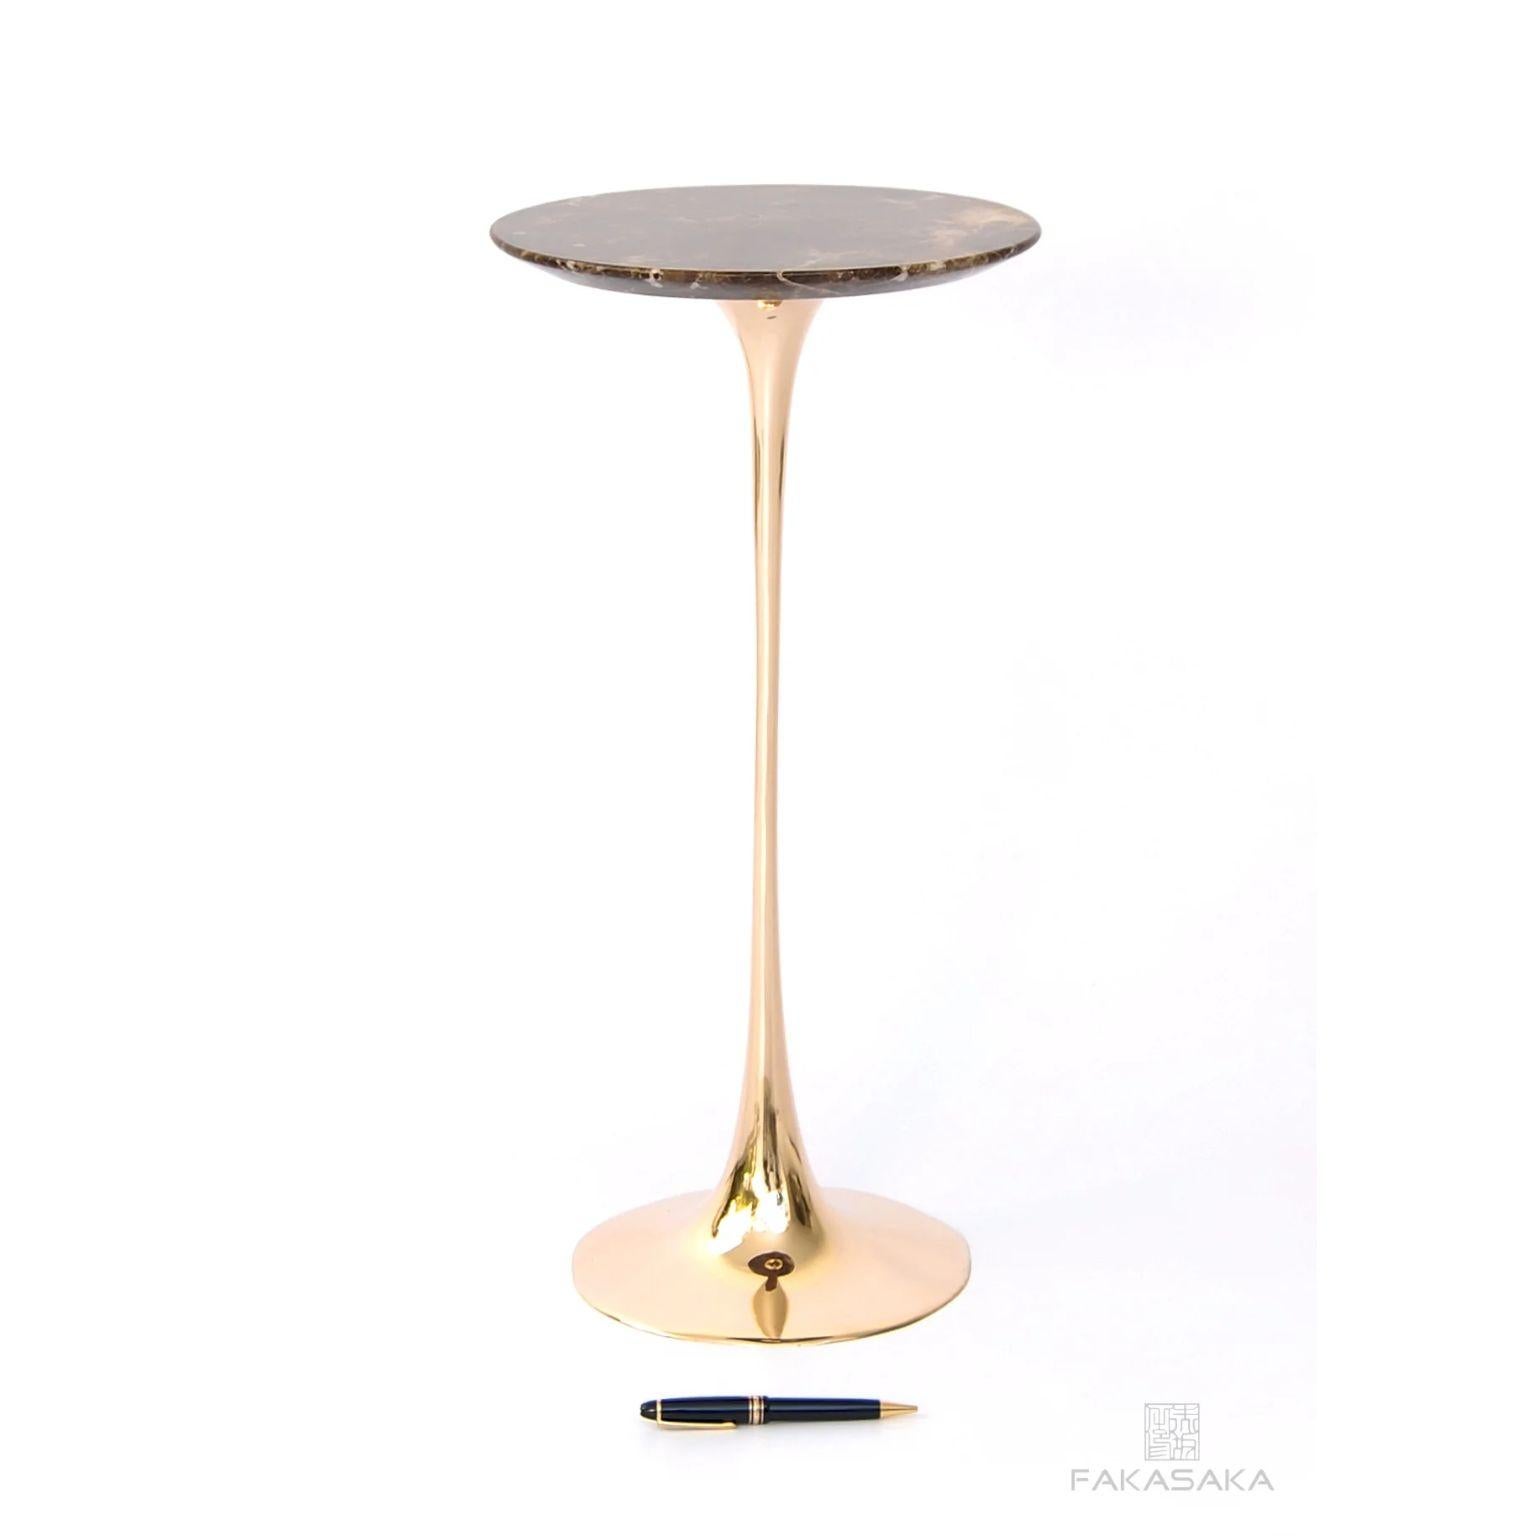 Modern Apple Drink Table with Marrom Imperial Marble Top by Fakasaka Design For Sale